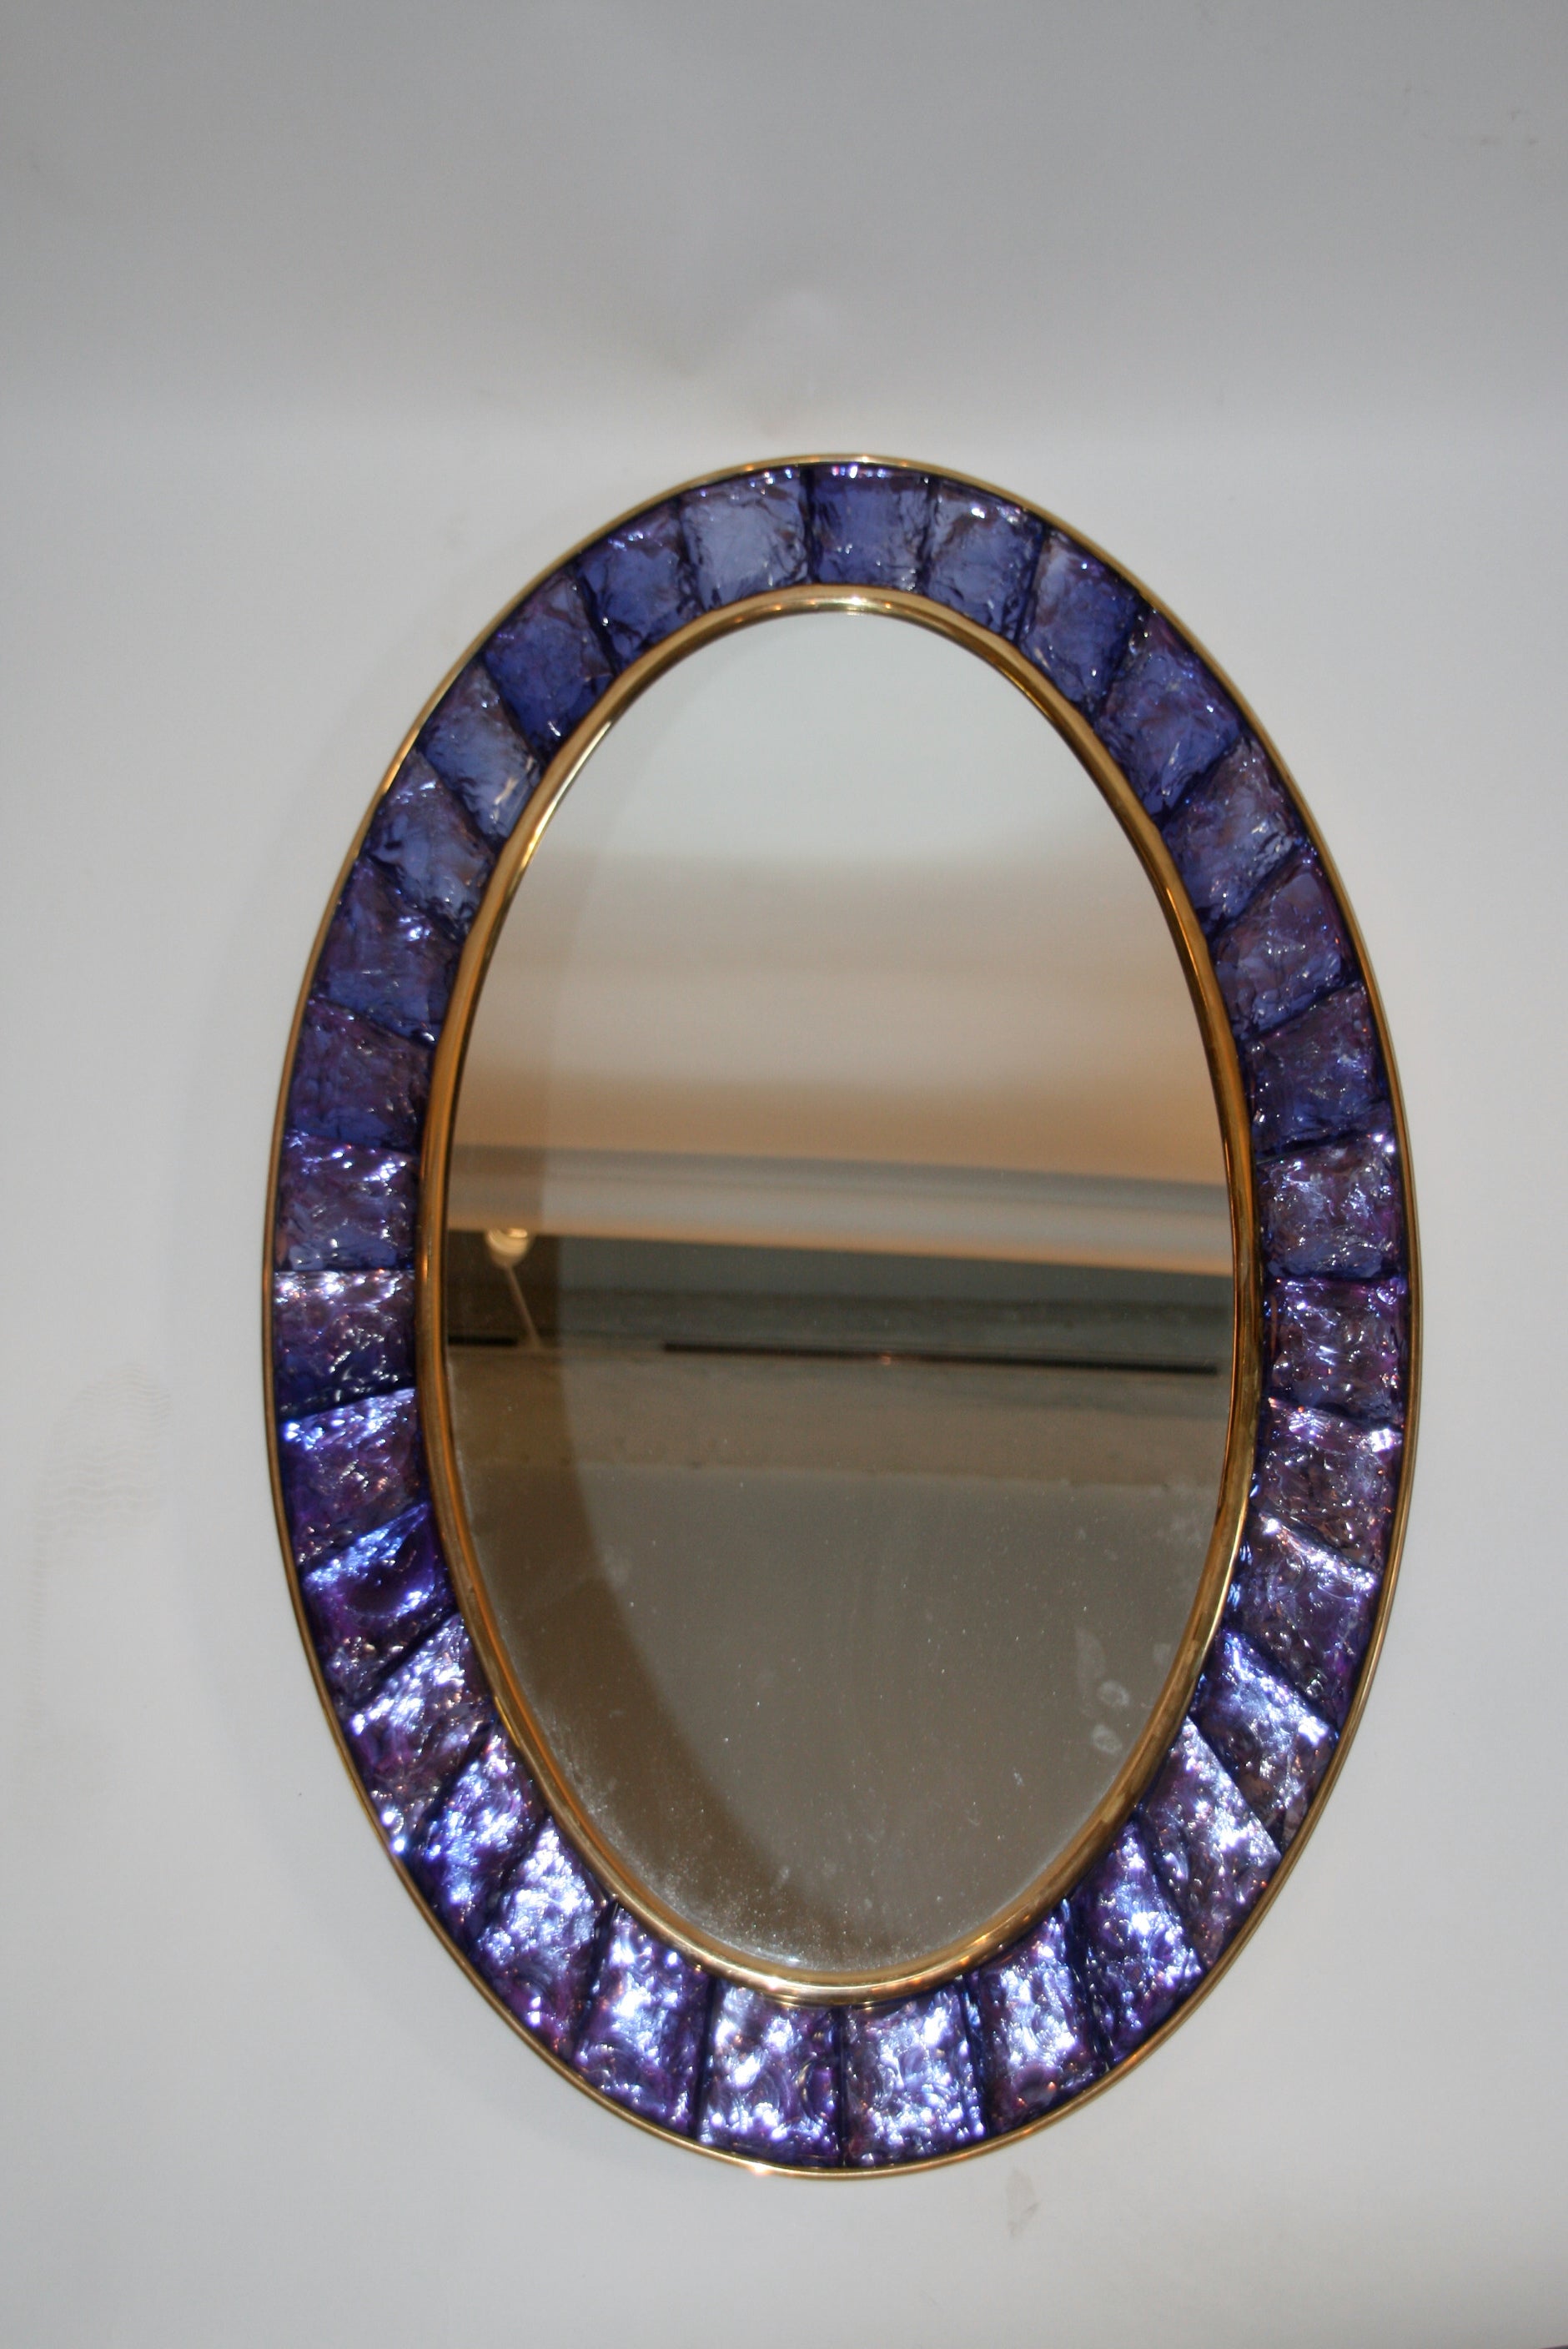 Ghiro, Made Brutalist Mirror, brass and glass, circa 2013, Italy.